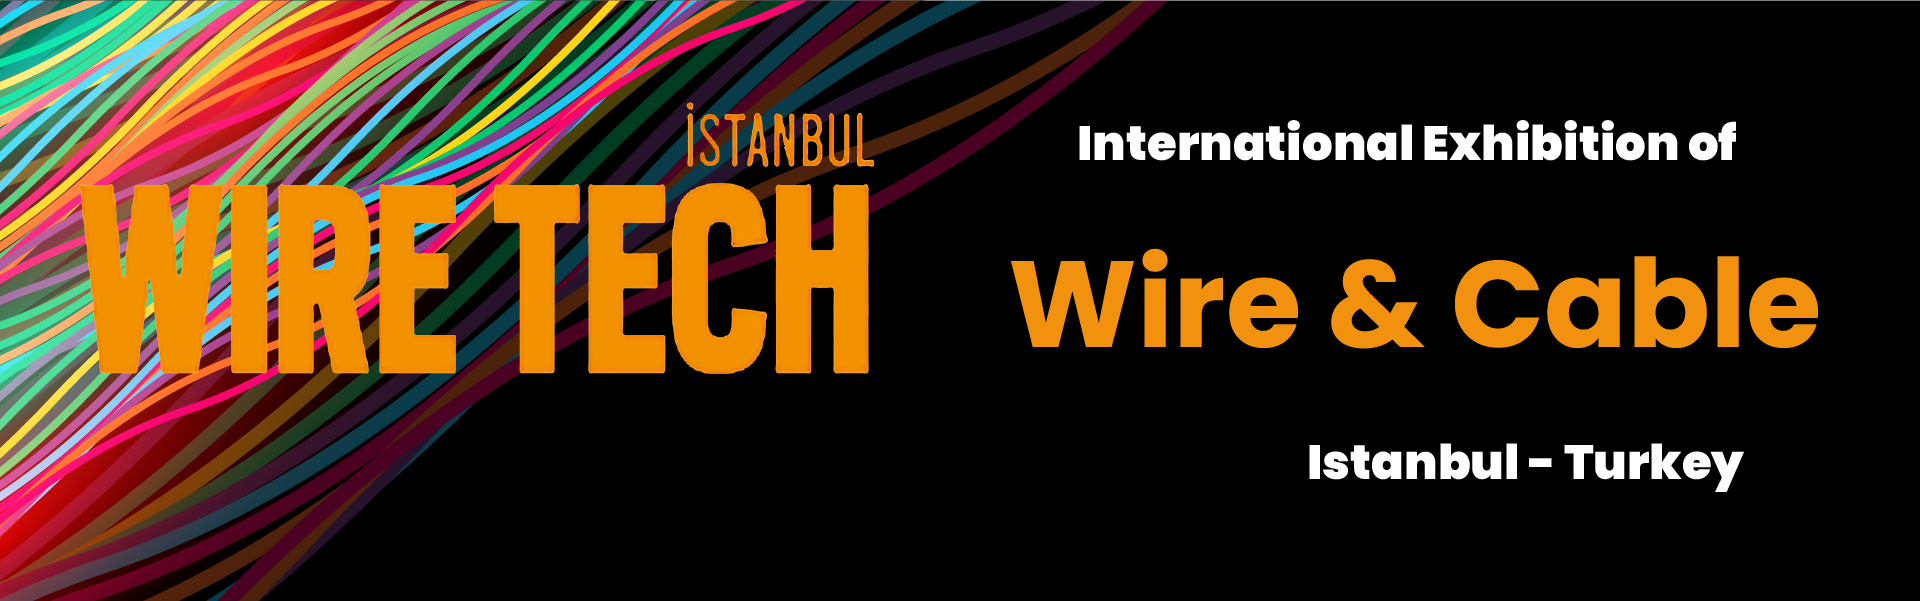 Wire & Cable (WireTech) Exhibition Istanbul Turkey